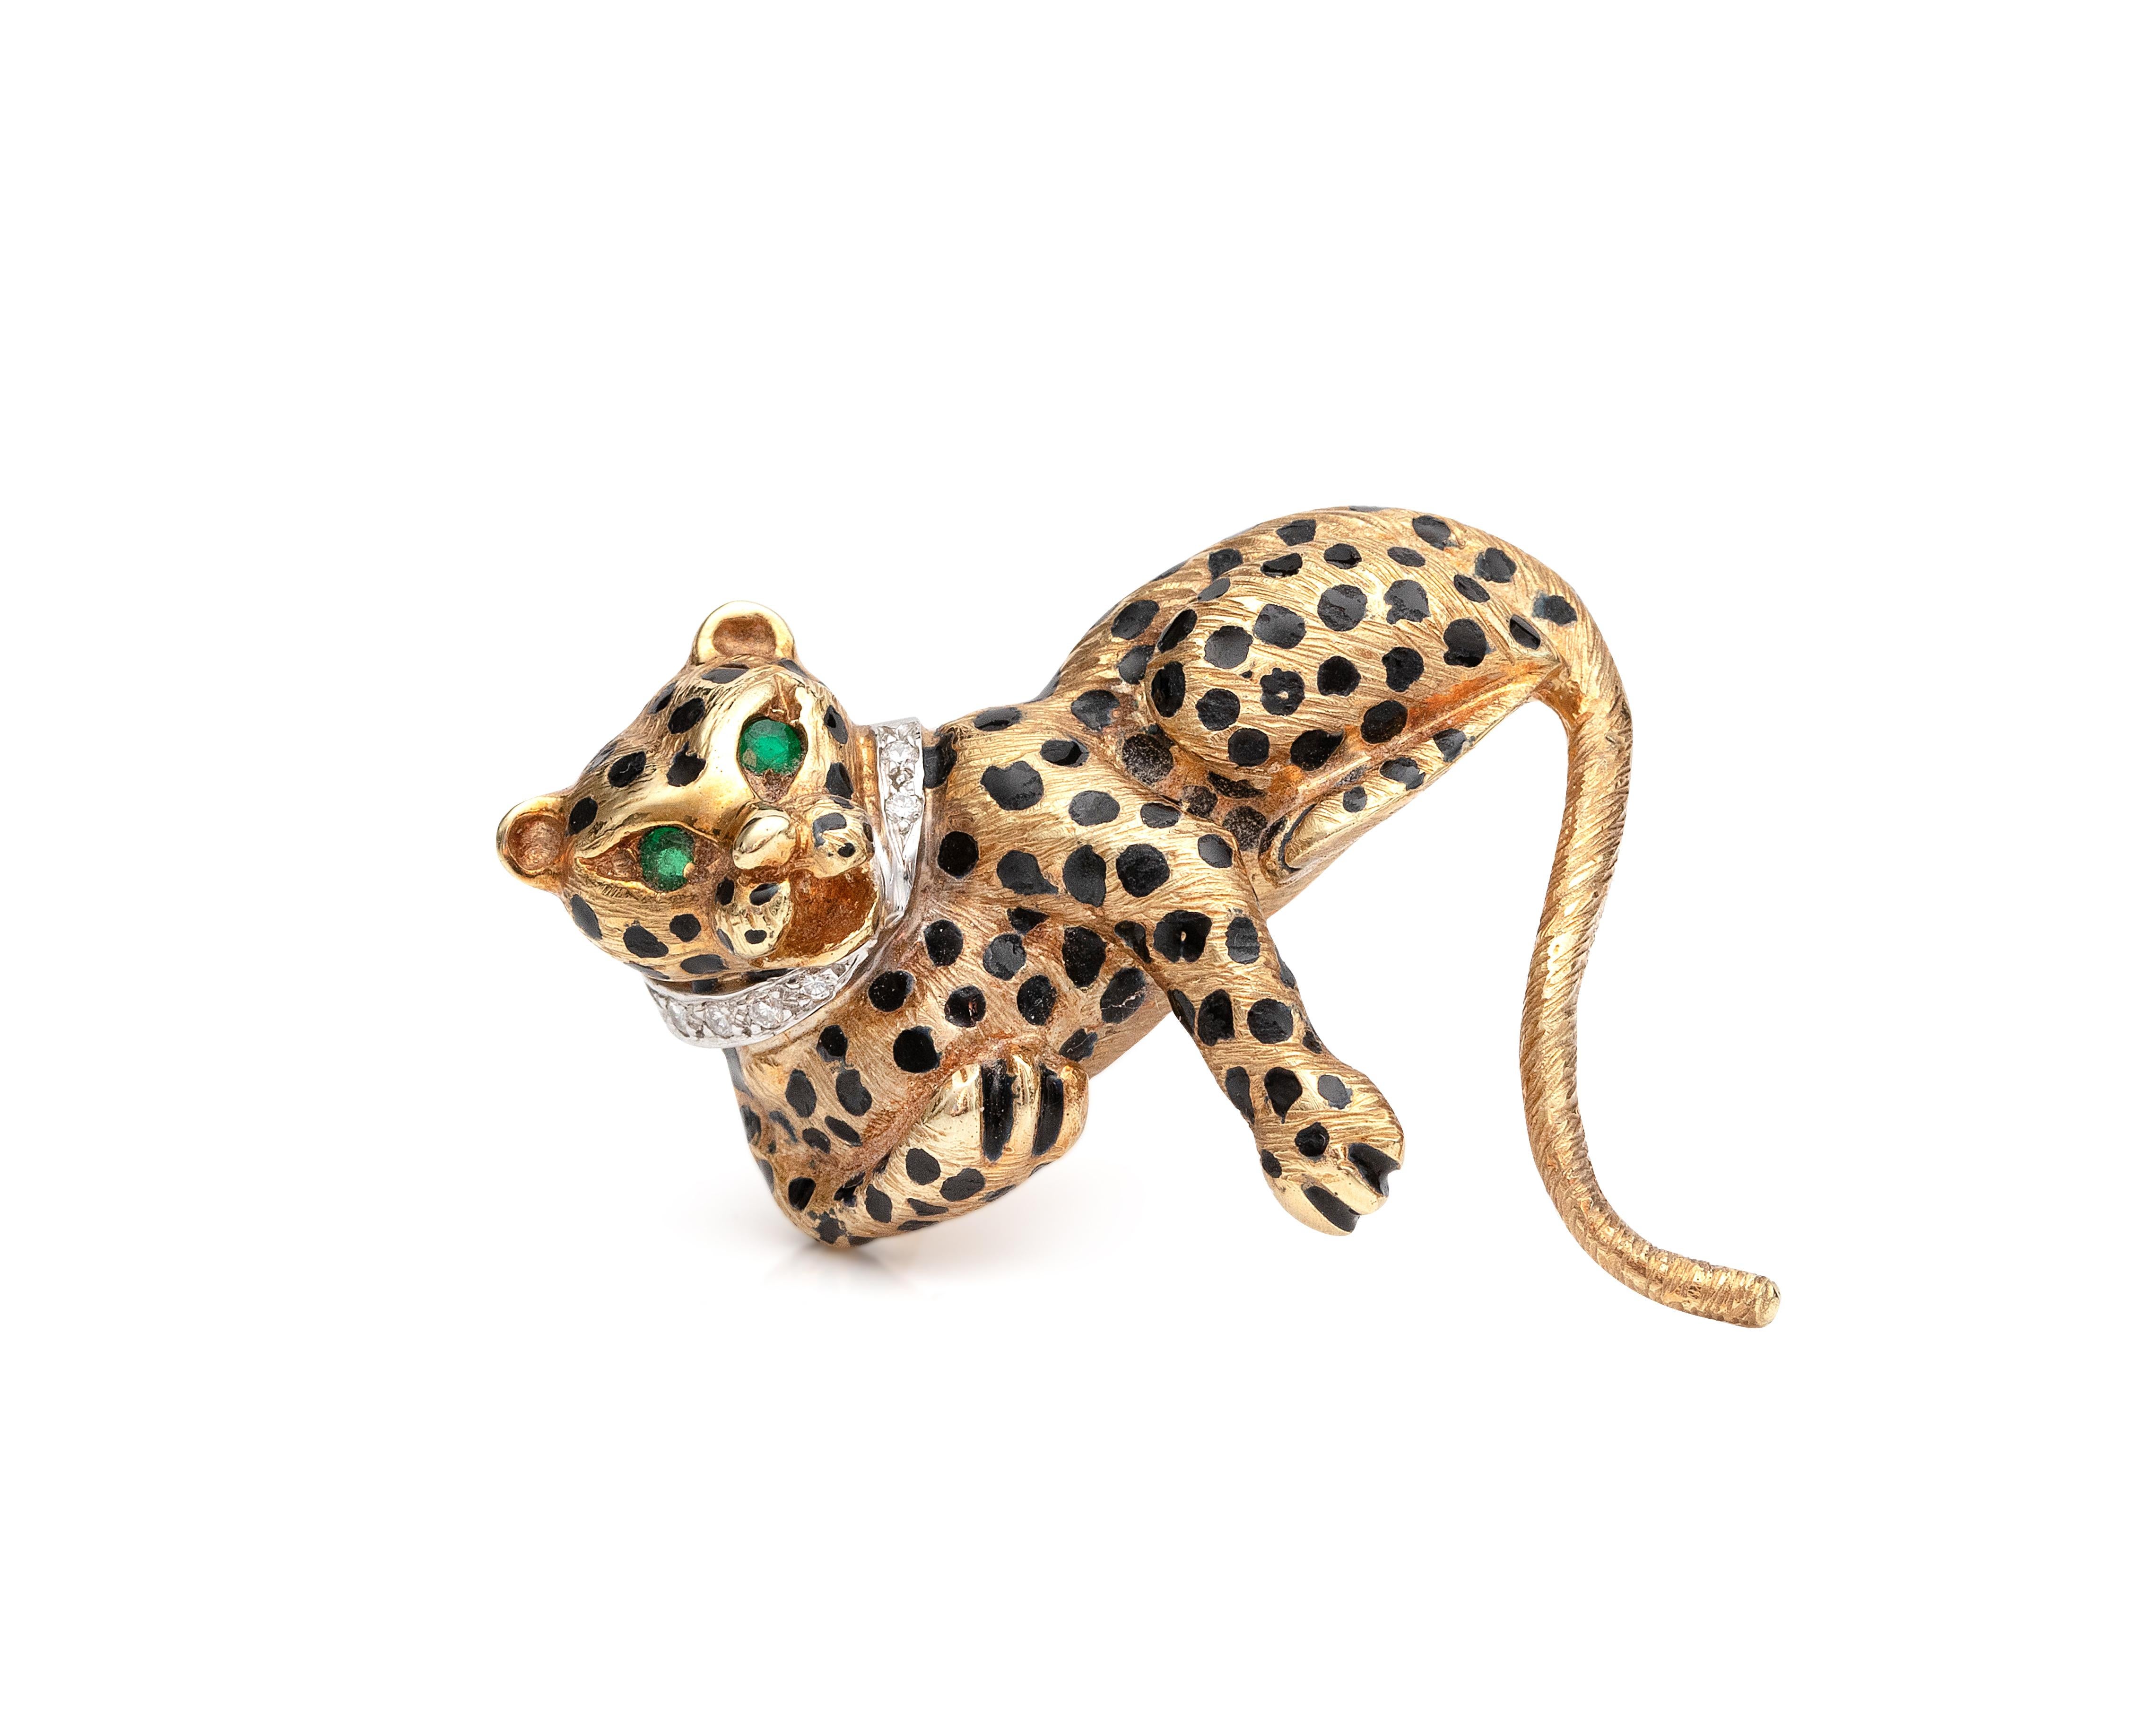 Beautiful Panther Brooch from 1970s with intricate detailing and high contrast 18 karat yellow gold 
Eyes: Emerald 
Collar: Diamond Collar


Item Details:
Metal type: 18 Karat Yellow Gold
Weight: 21.23 Grams 
Size: 2 Inches width approximately x 1